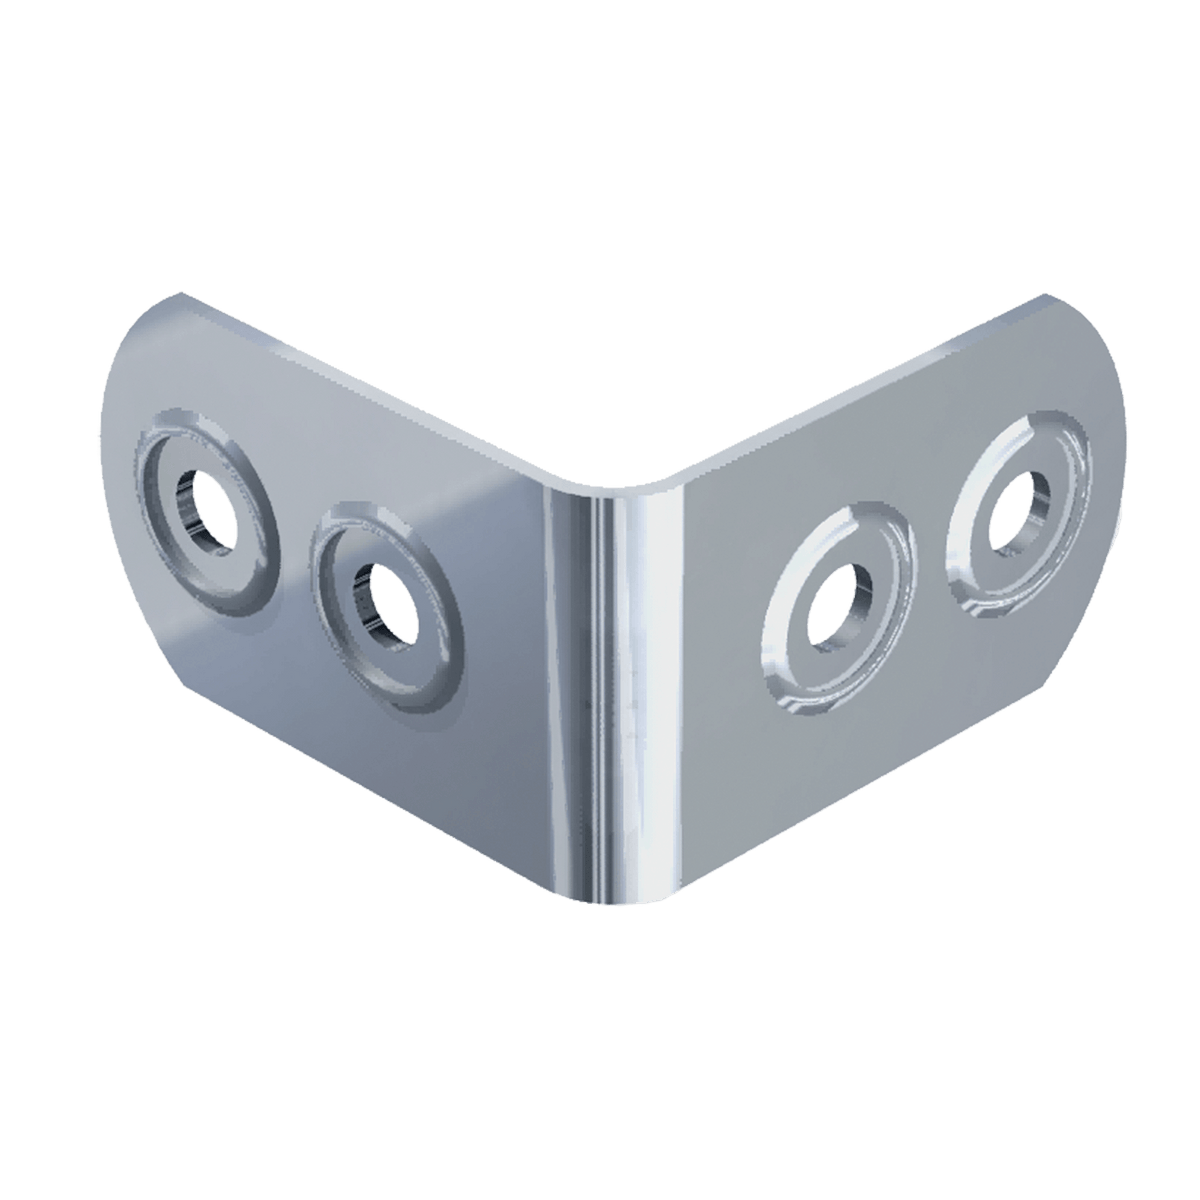 Small Four-Hole Clamp With Rivet Protectors, 3/4 view